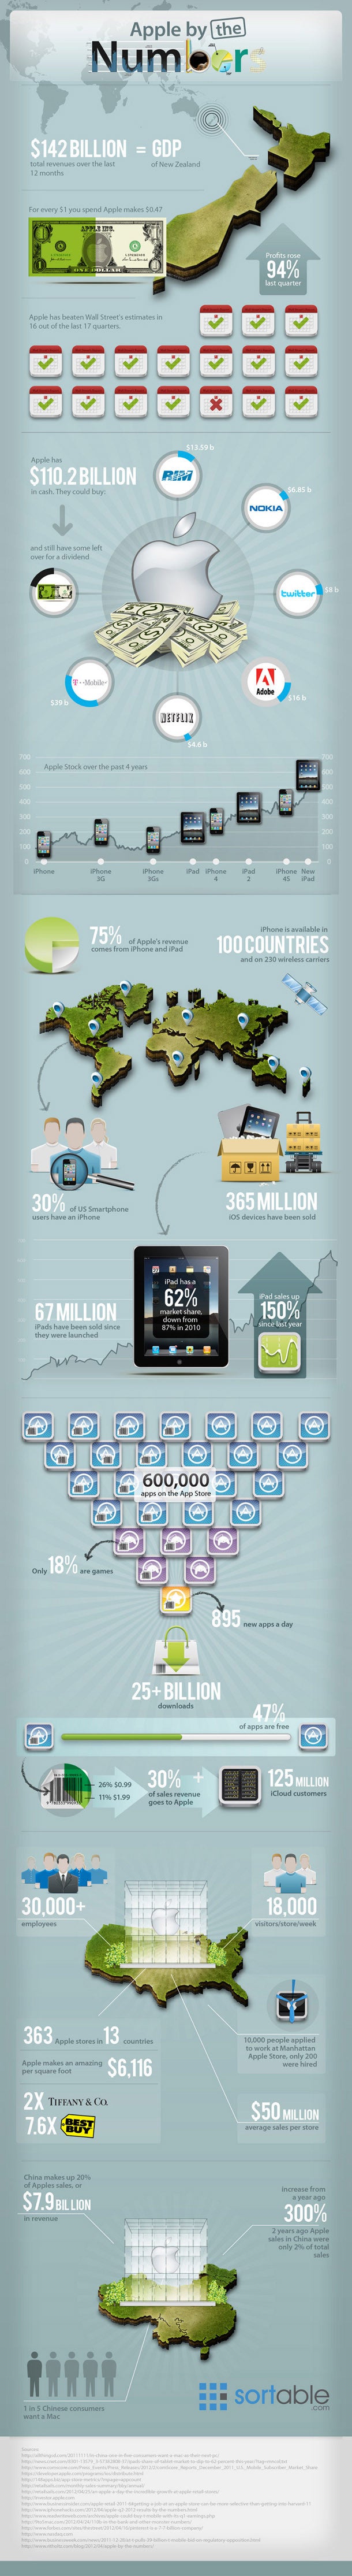 Apple in numbers: Infographic